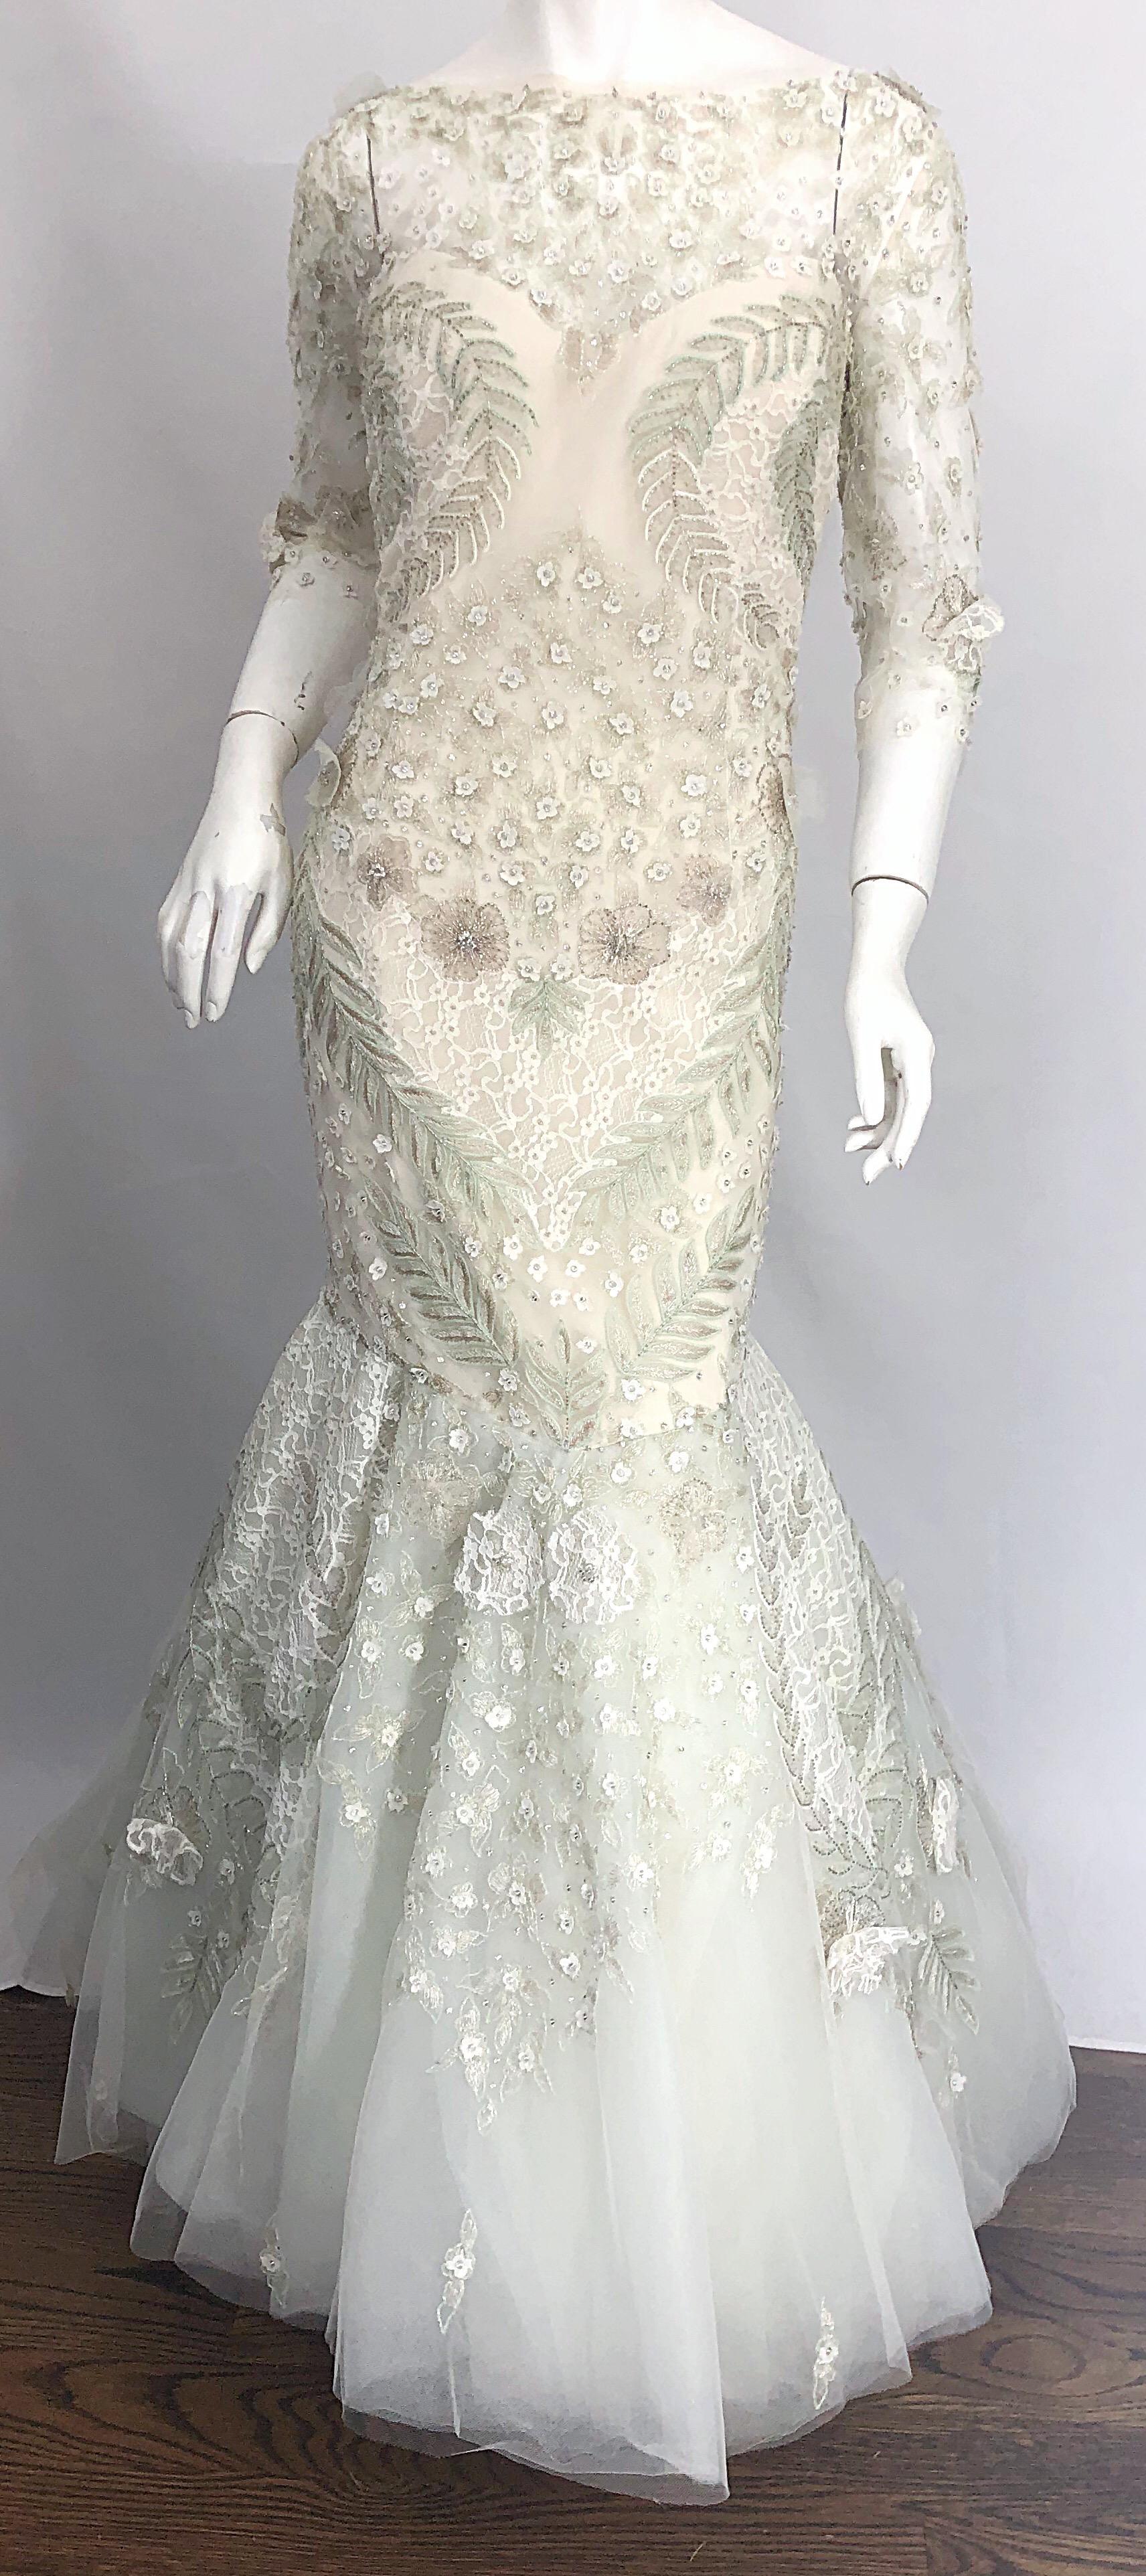 Monique Lhuillier Size 14 Mint Green Ivory Beaded Sequined Mermaid Gown Dress For Sale 3